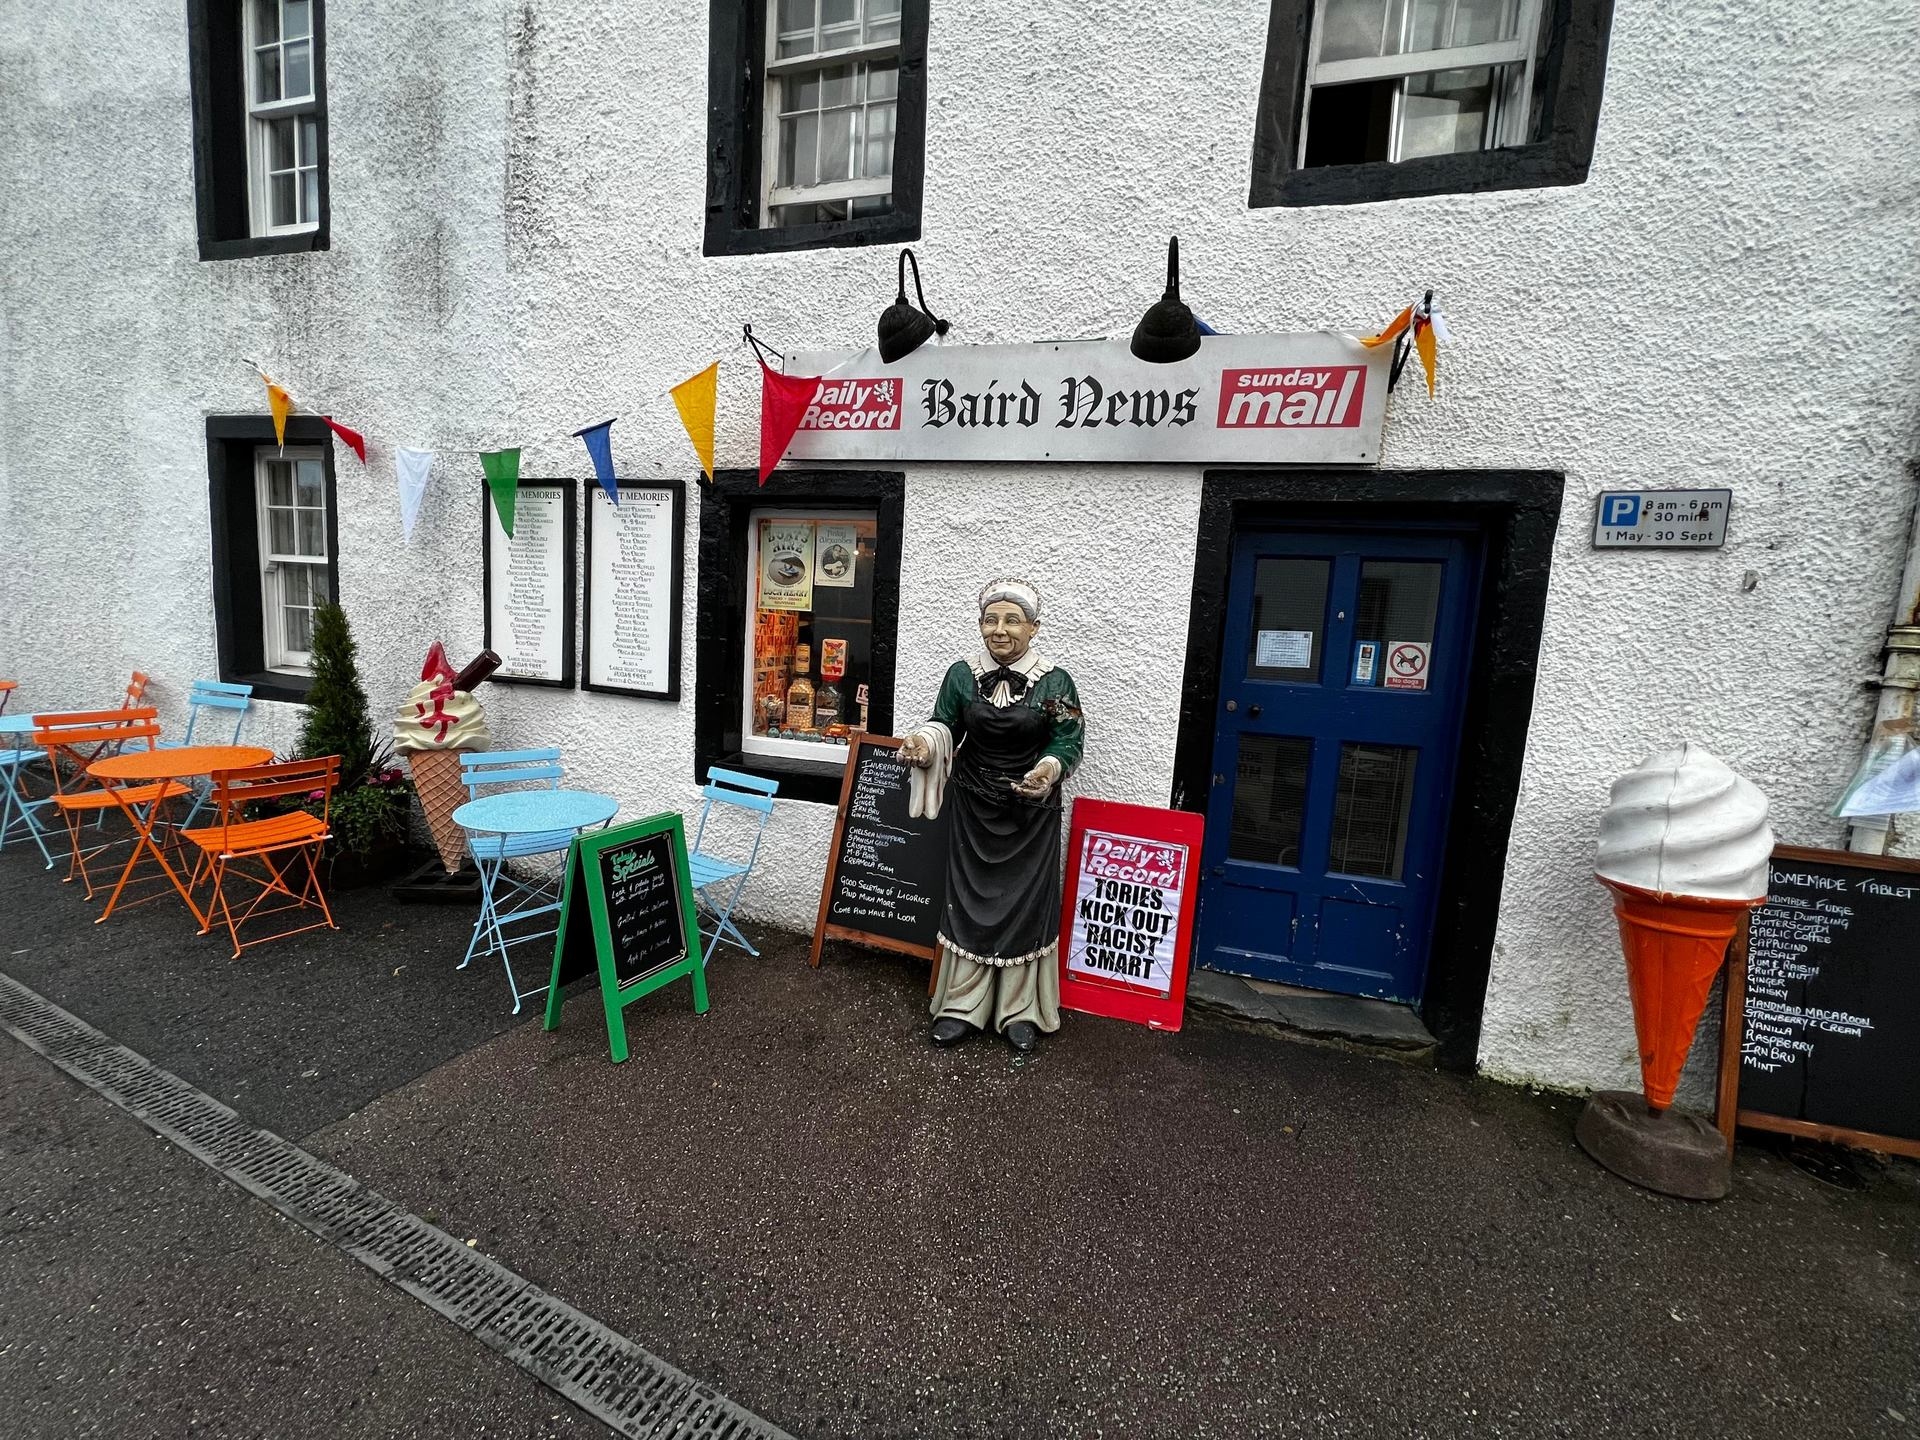 Inveraray underwent a major 90s transformation in September last year as crews descended on the town.